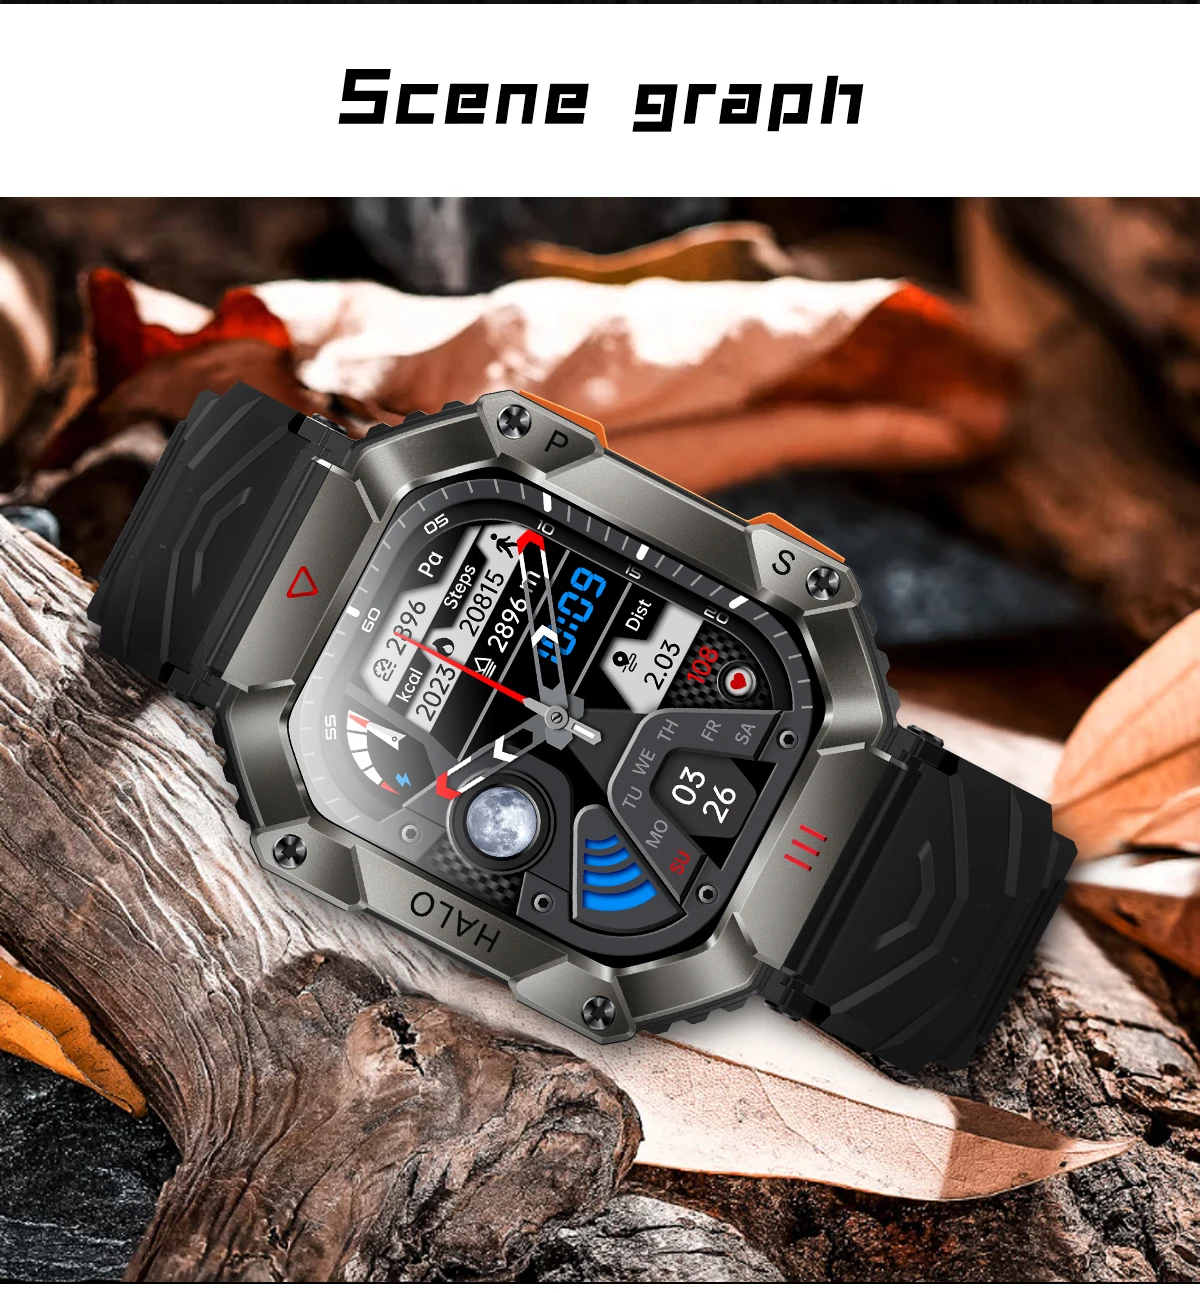 620mAh large battery durable military smart watch0